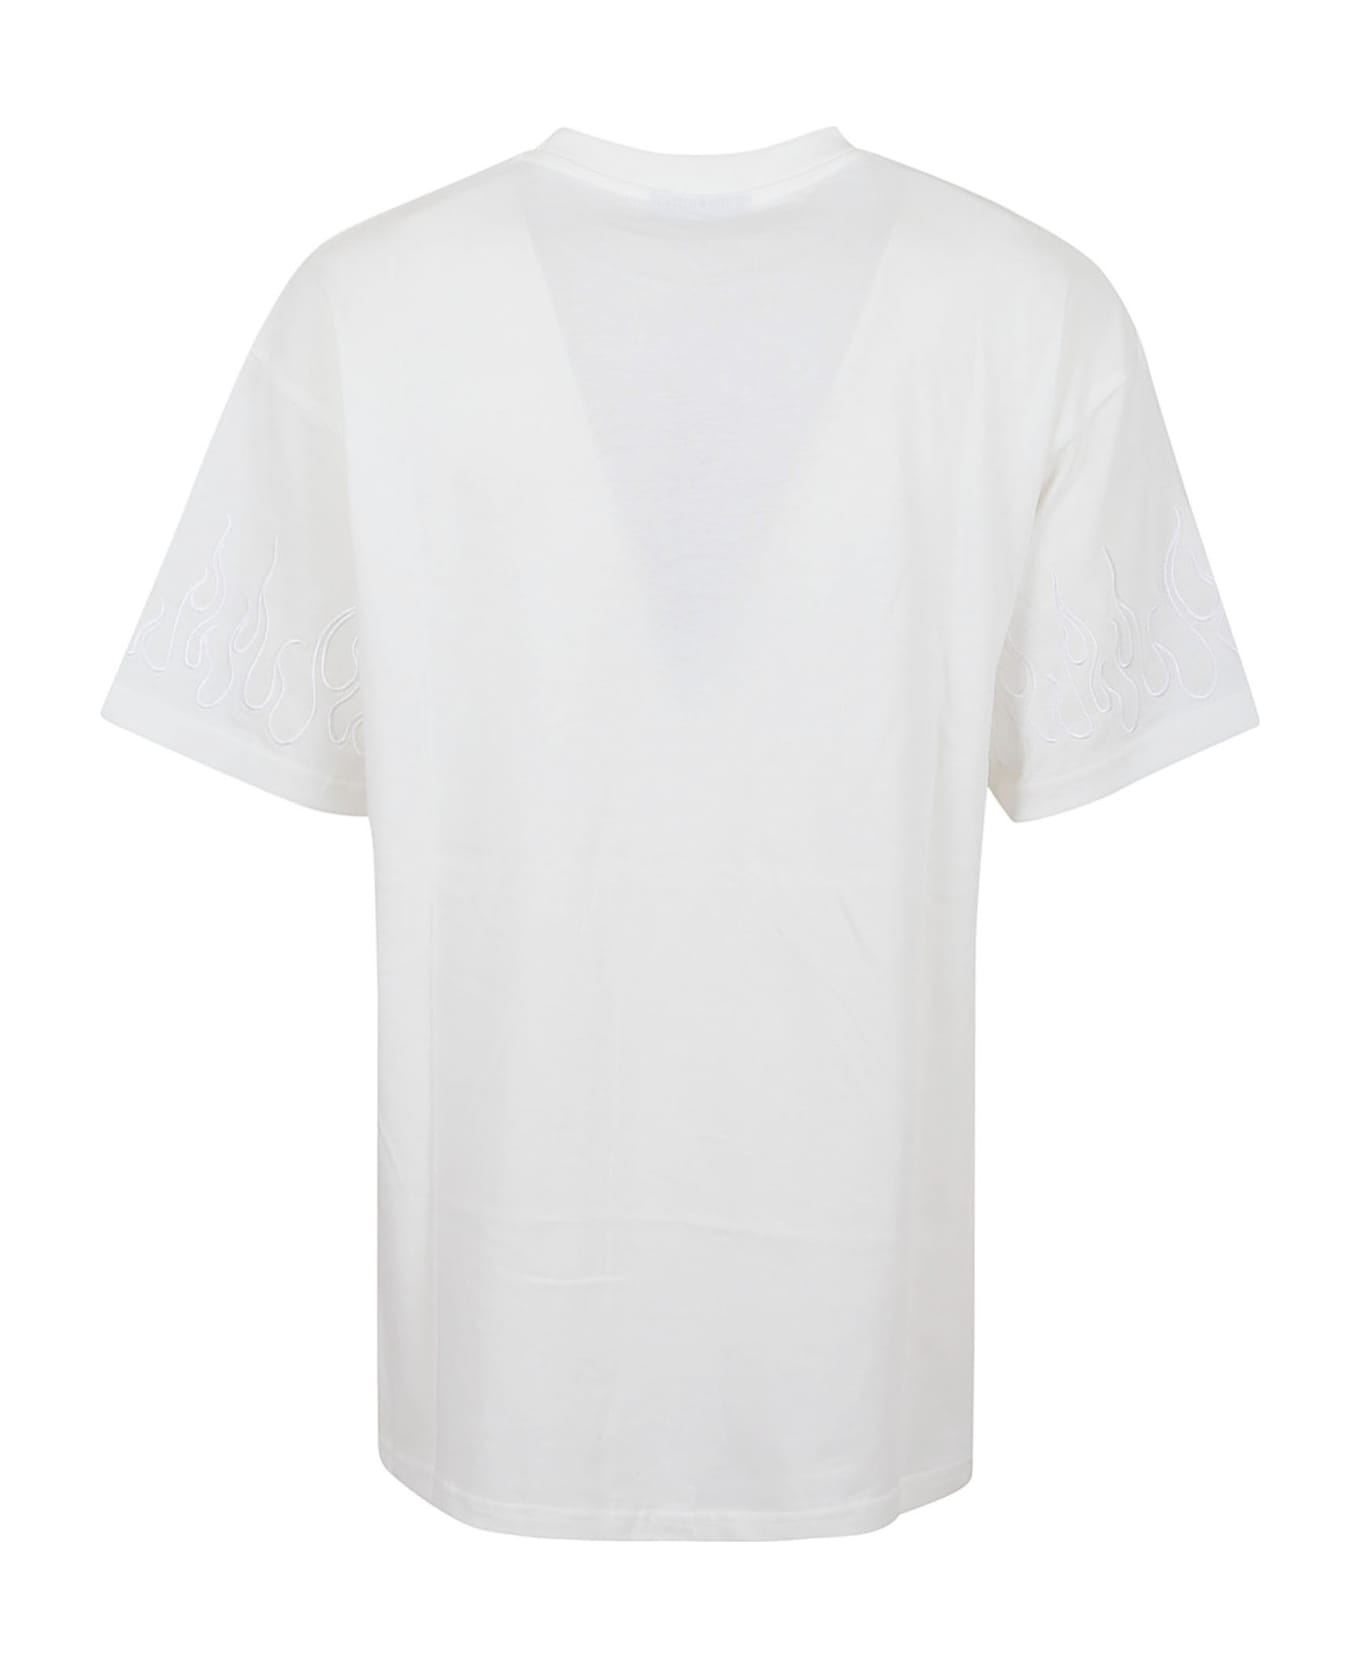 Vision of Super White Tshirt With White Embroidered Flames - White シャツ